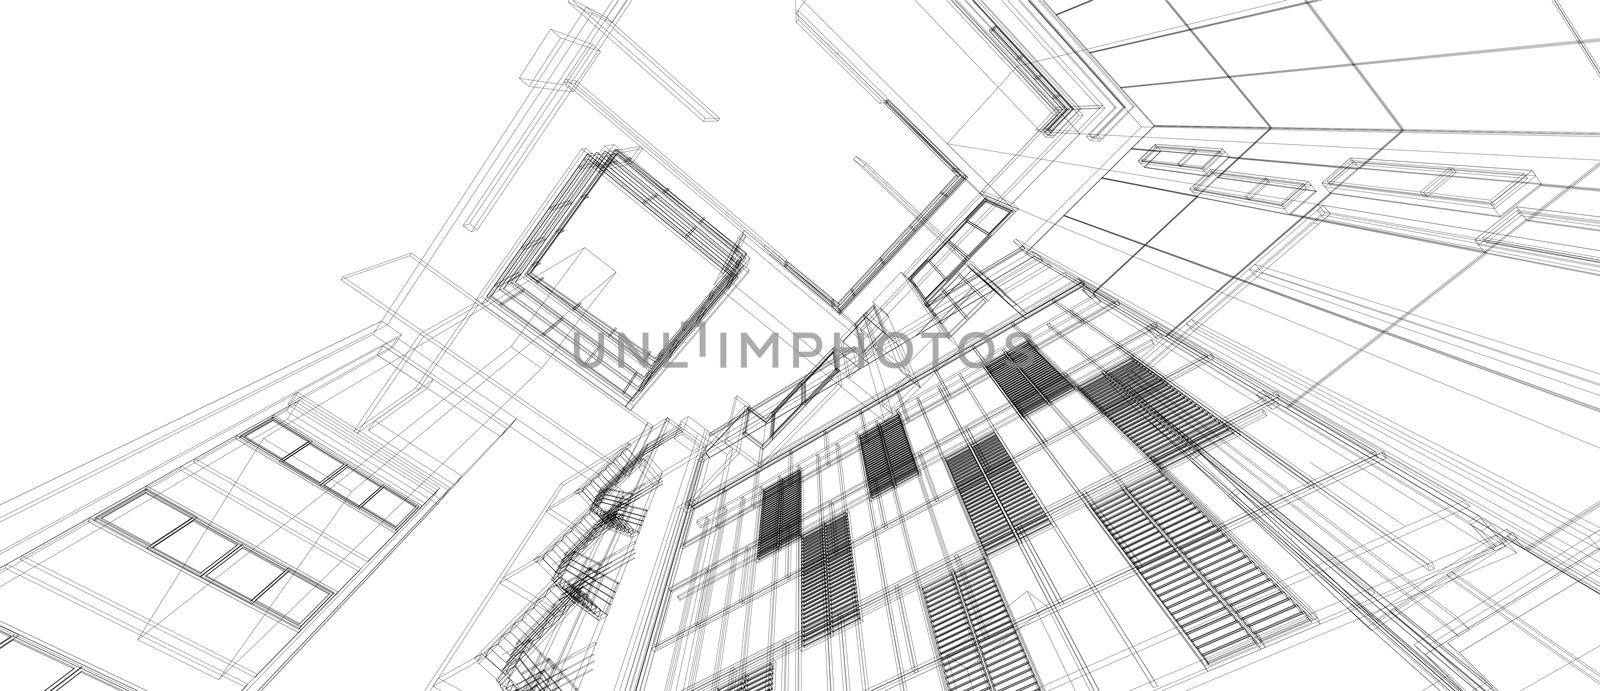 Architecture building space design concept 3d perspective wire frame rendering isolated white background. For abstract background or wallpaper desktops computer technology design architectural theme.